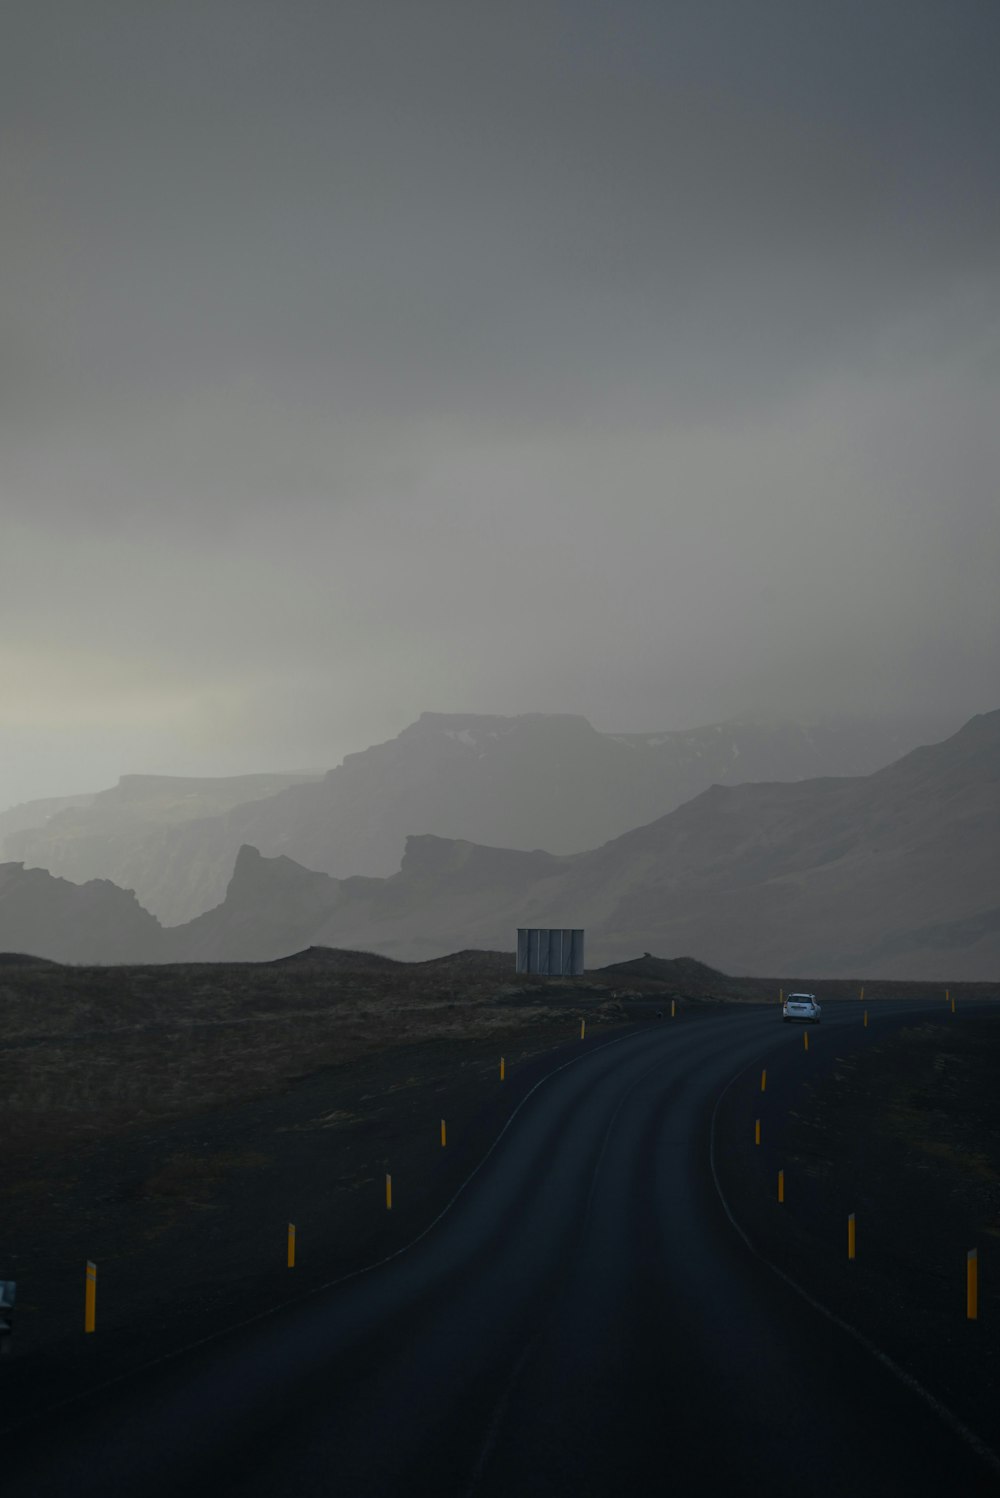 a dark road with mountains in the background